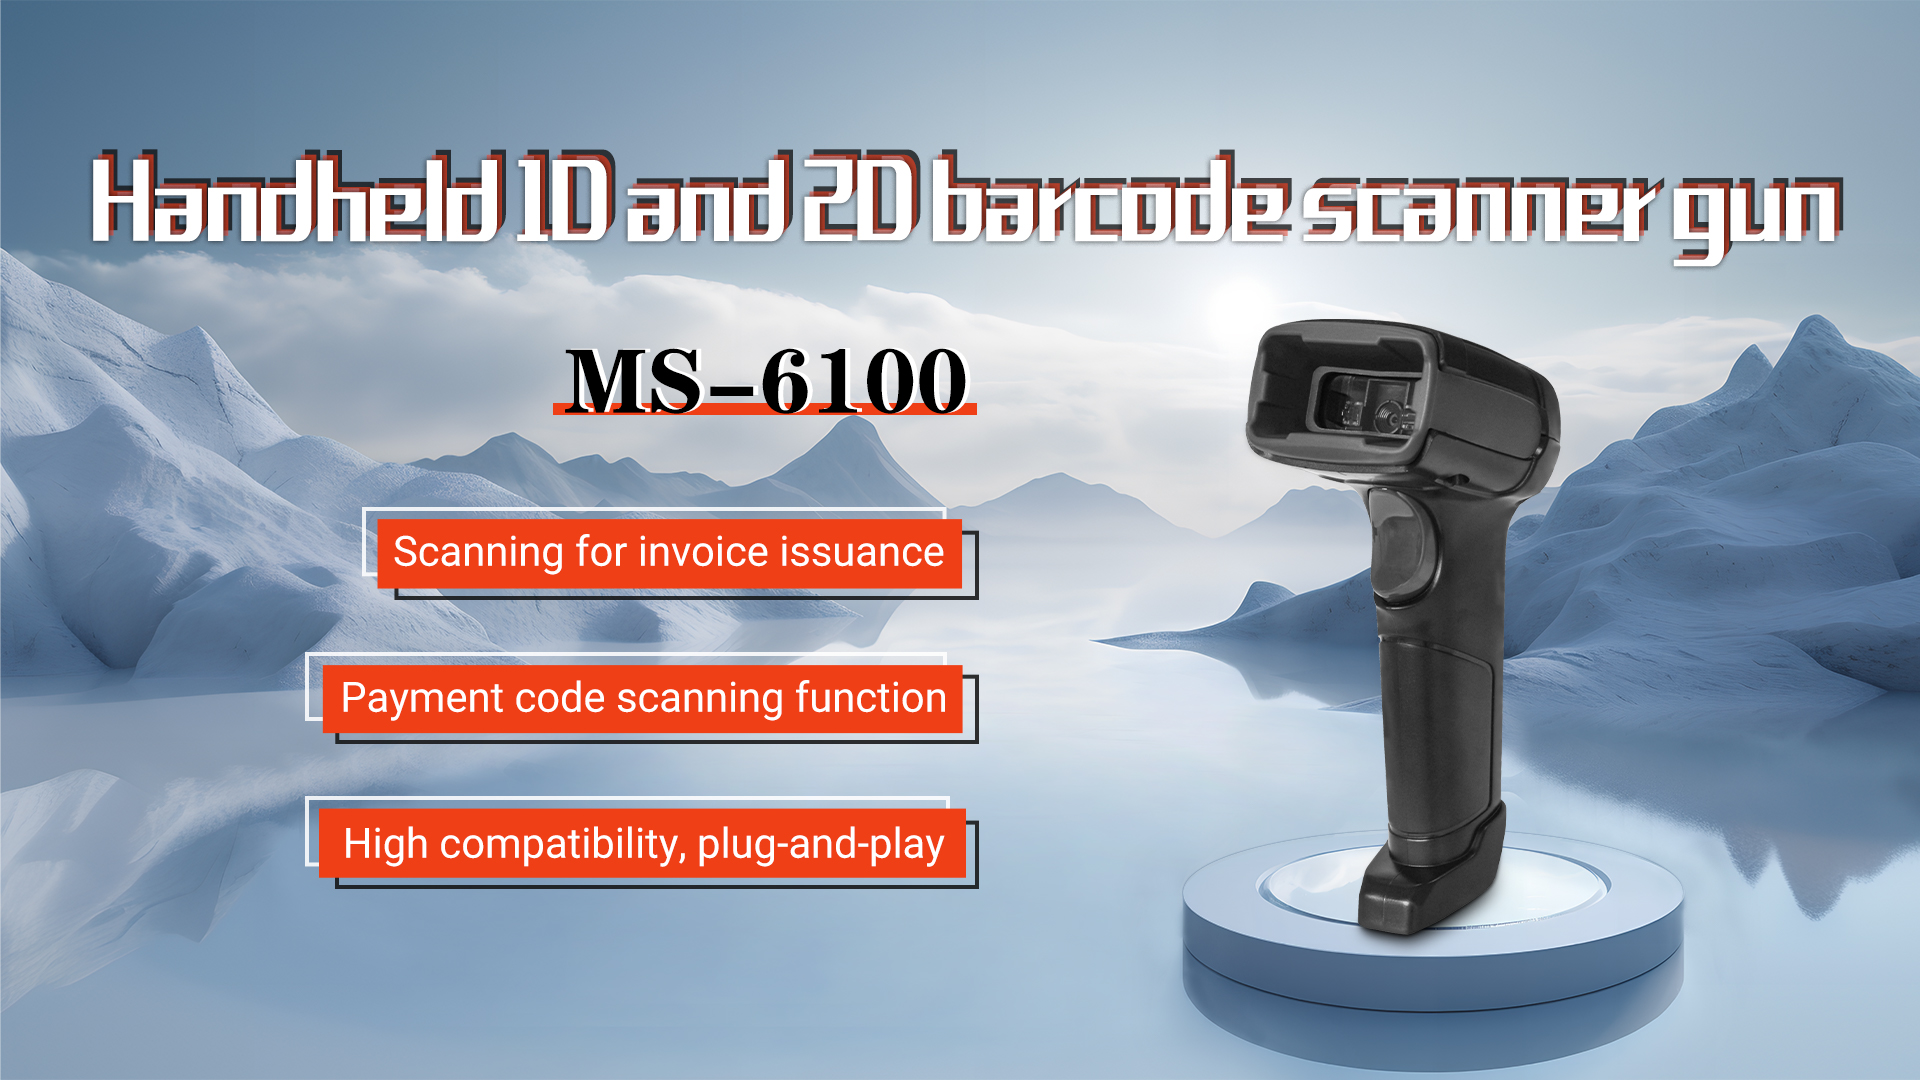 The application fields of the MASUNG MS-6100 barcode scanner